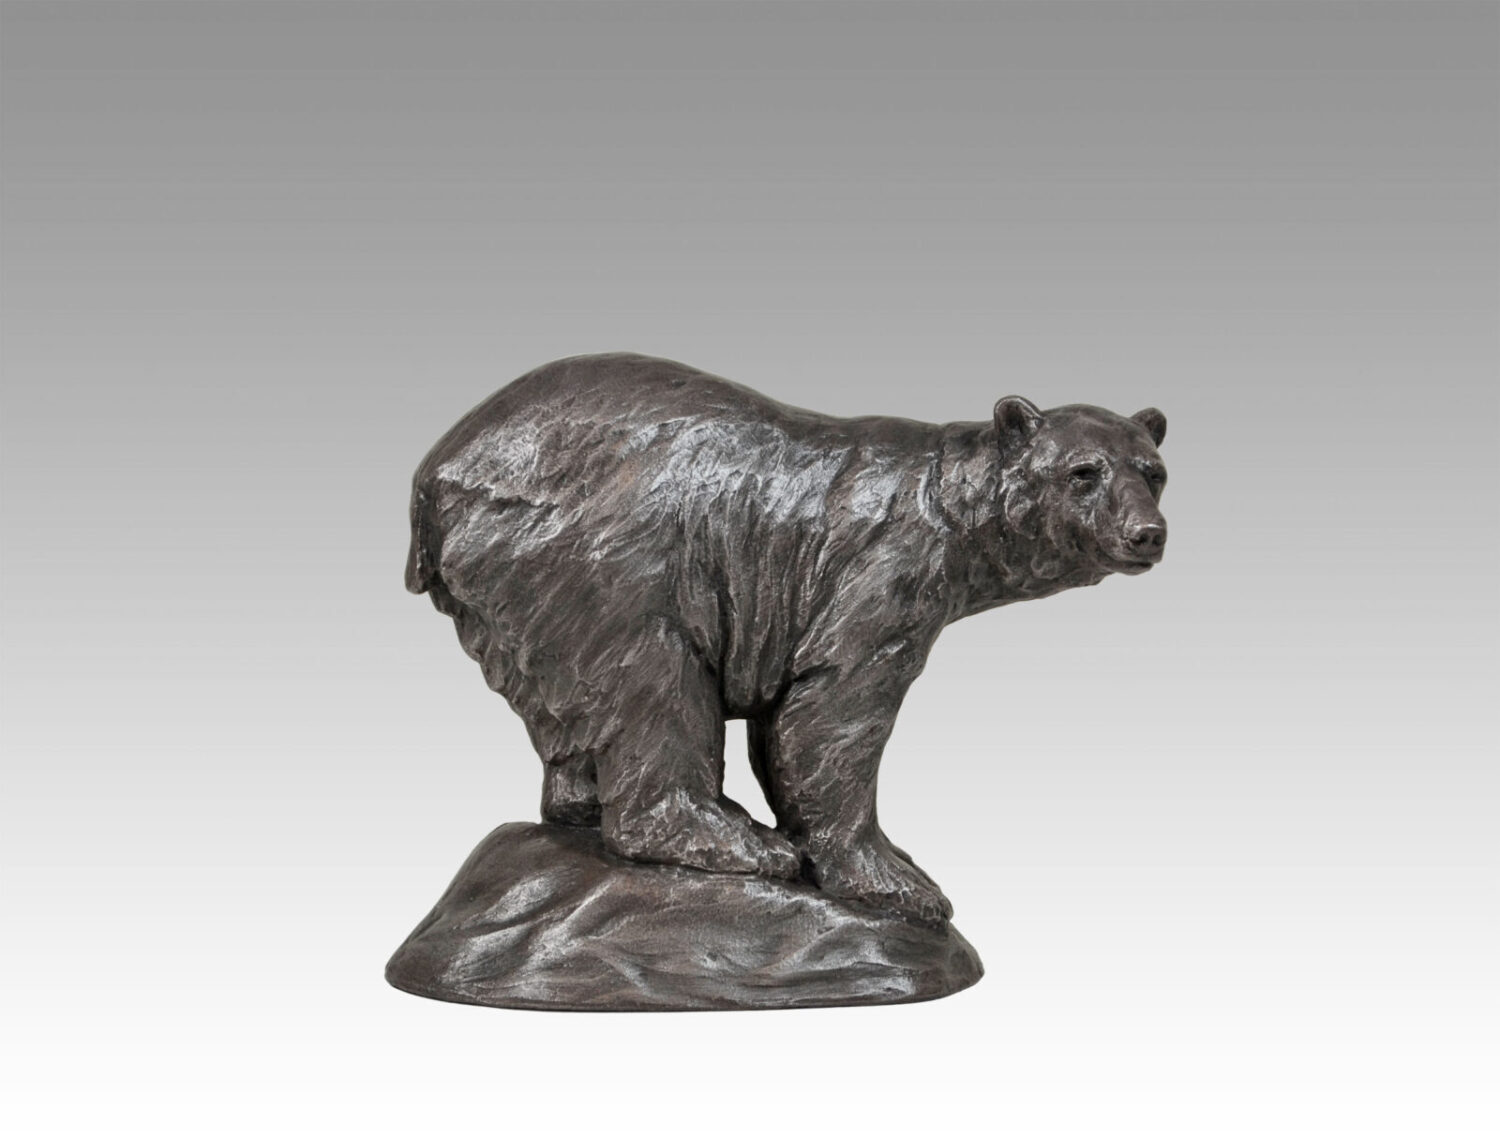 Gallery, Go with the "Floe", $275 CAD, Metal Infused, 8 ¼" L x 7" H, Edition 60, Moonlit Ore Finish, Wildlife Sculpture of a polar bear, Sculptor Tyler Fauvelle